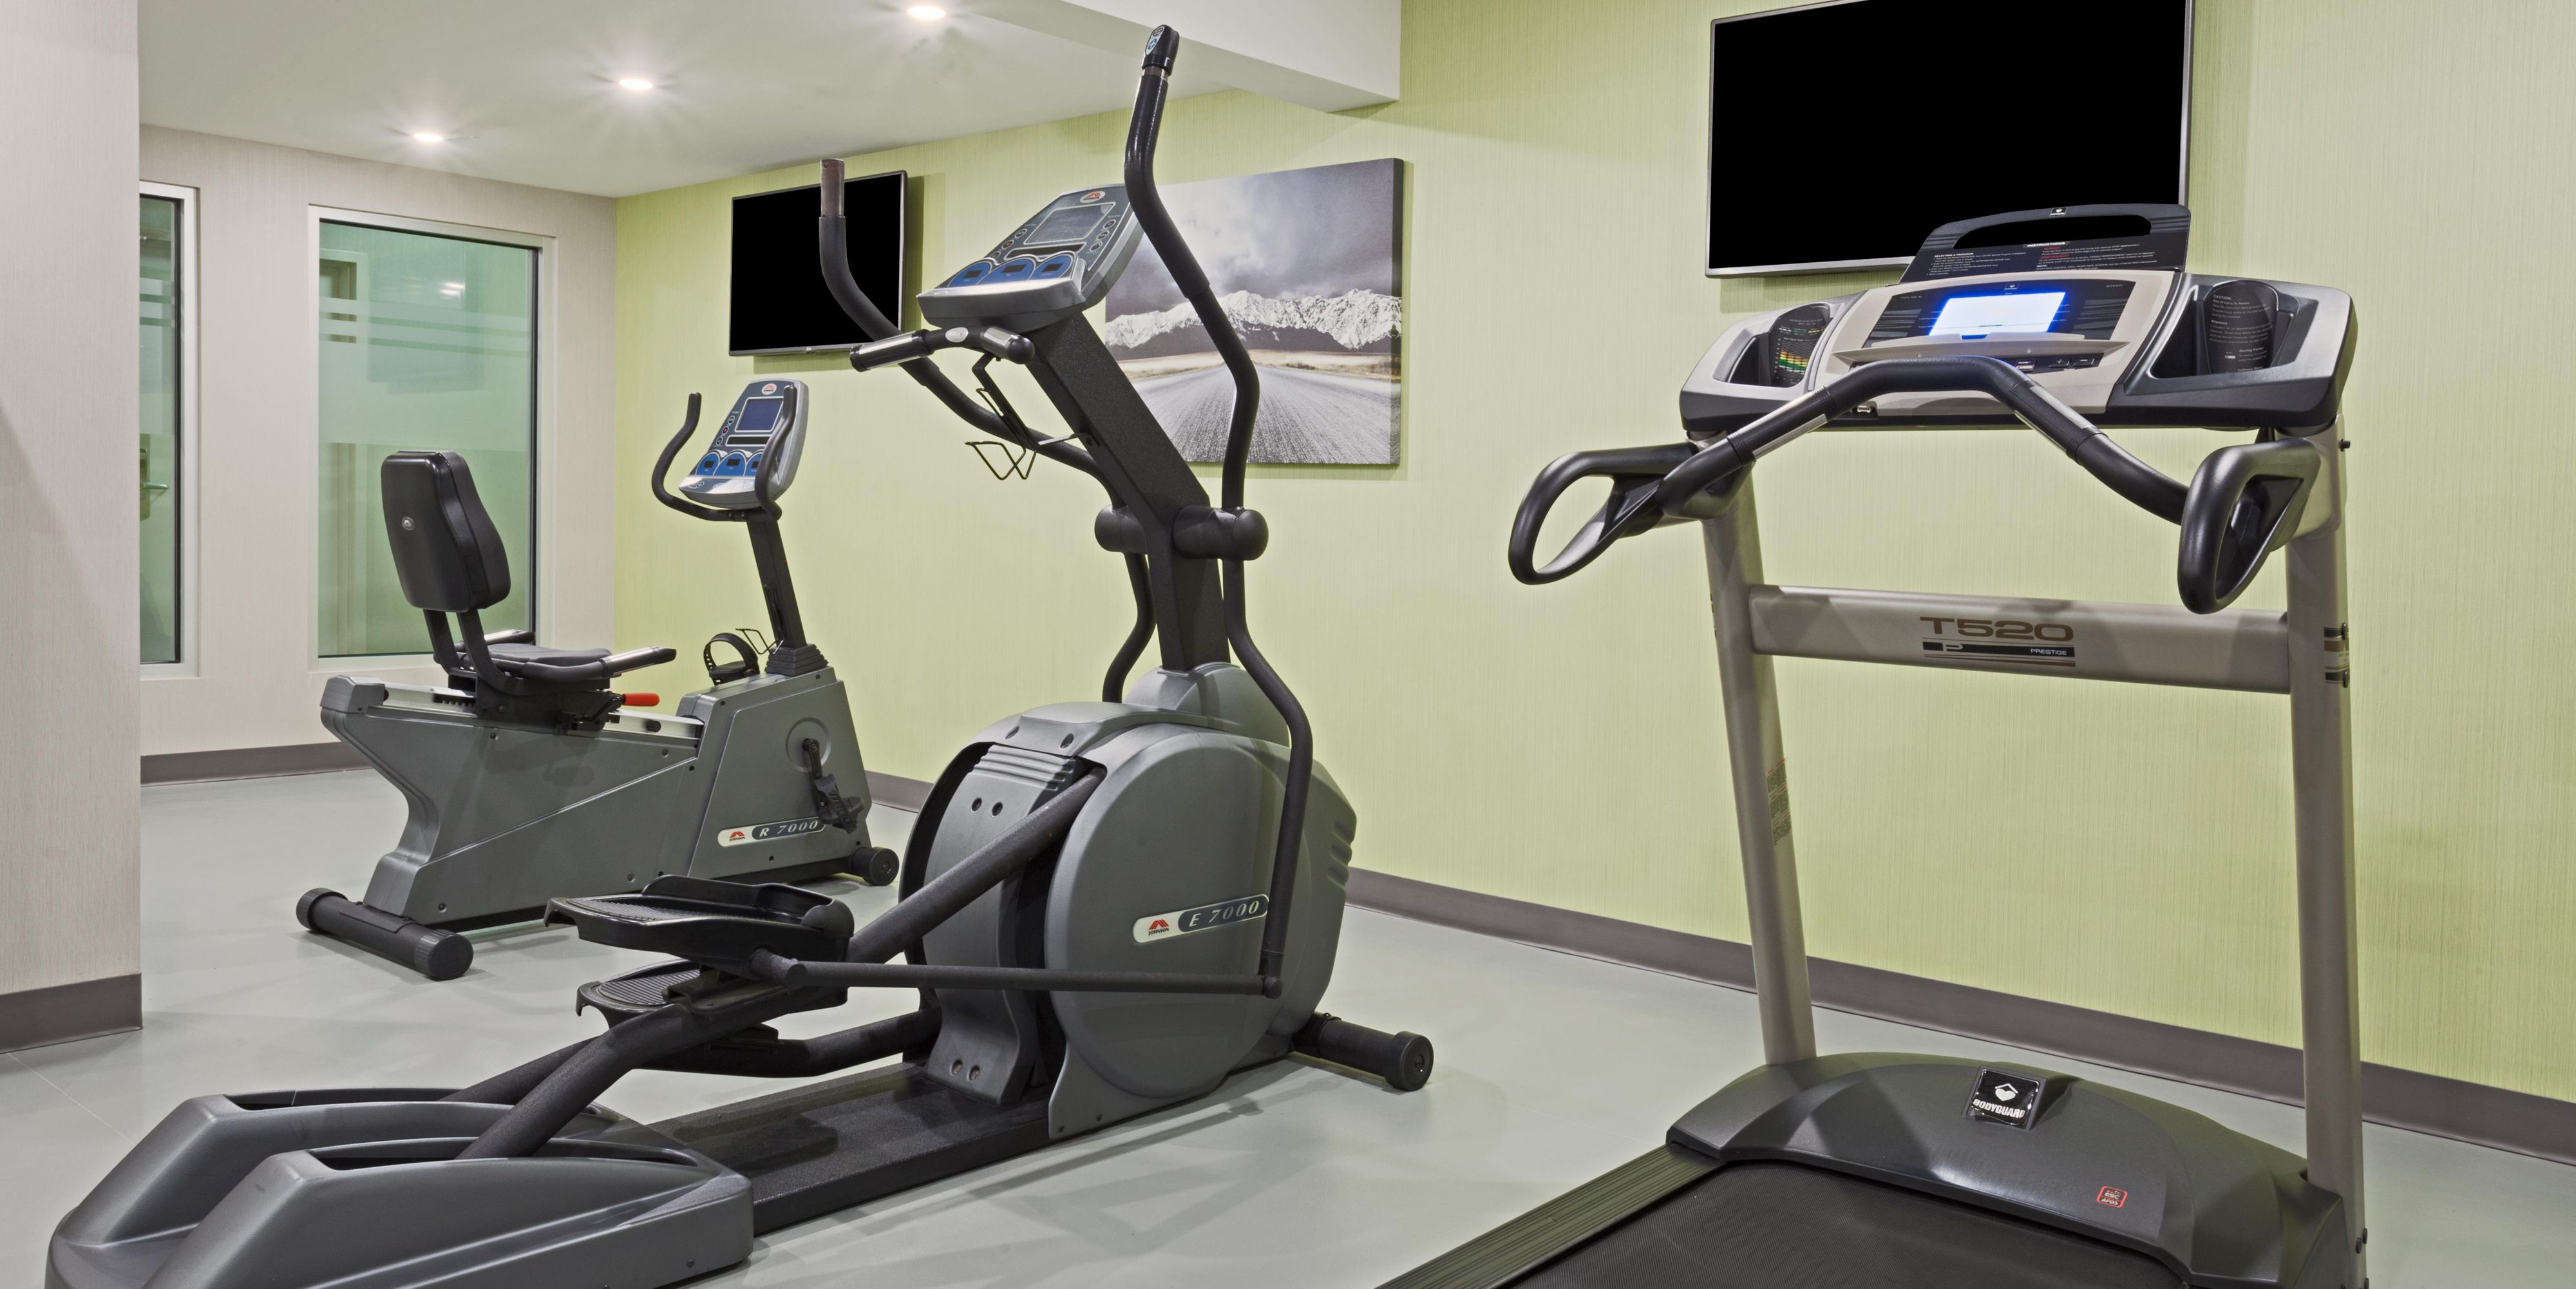 Our onsite fitness center has everything you need to get in a great workout on the road, so you don't have to feel like you're out of your routine. We've got treadmills, elliptical, recumbent bike, dumbbells, medicine ball and more